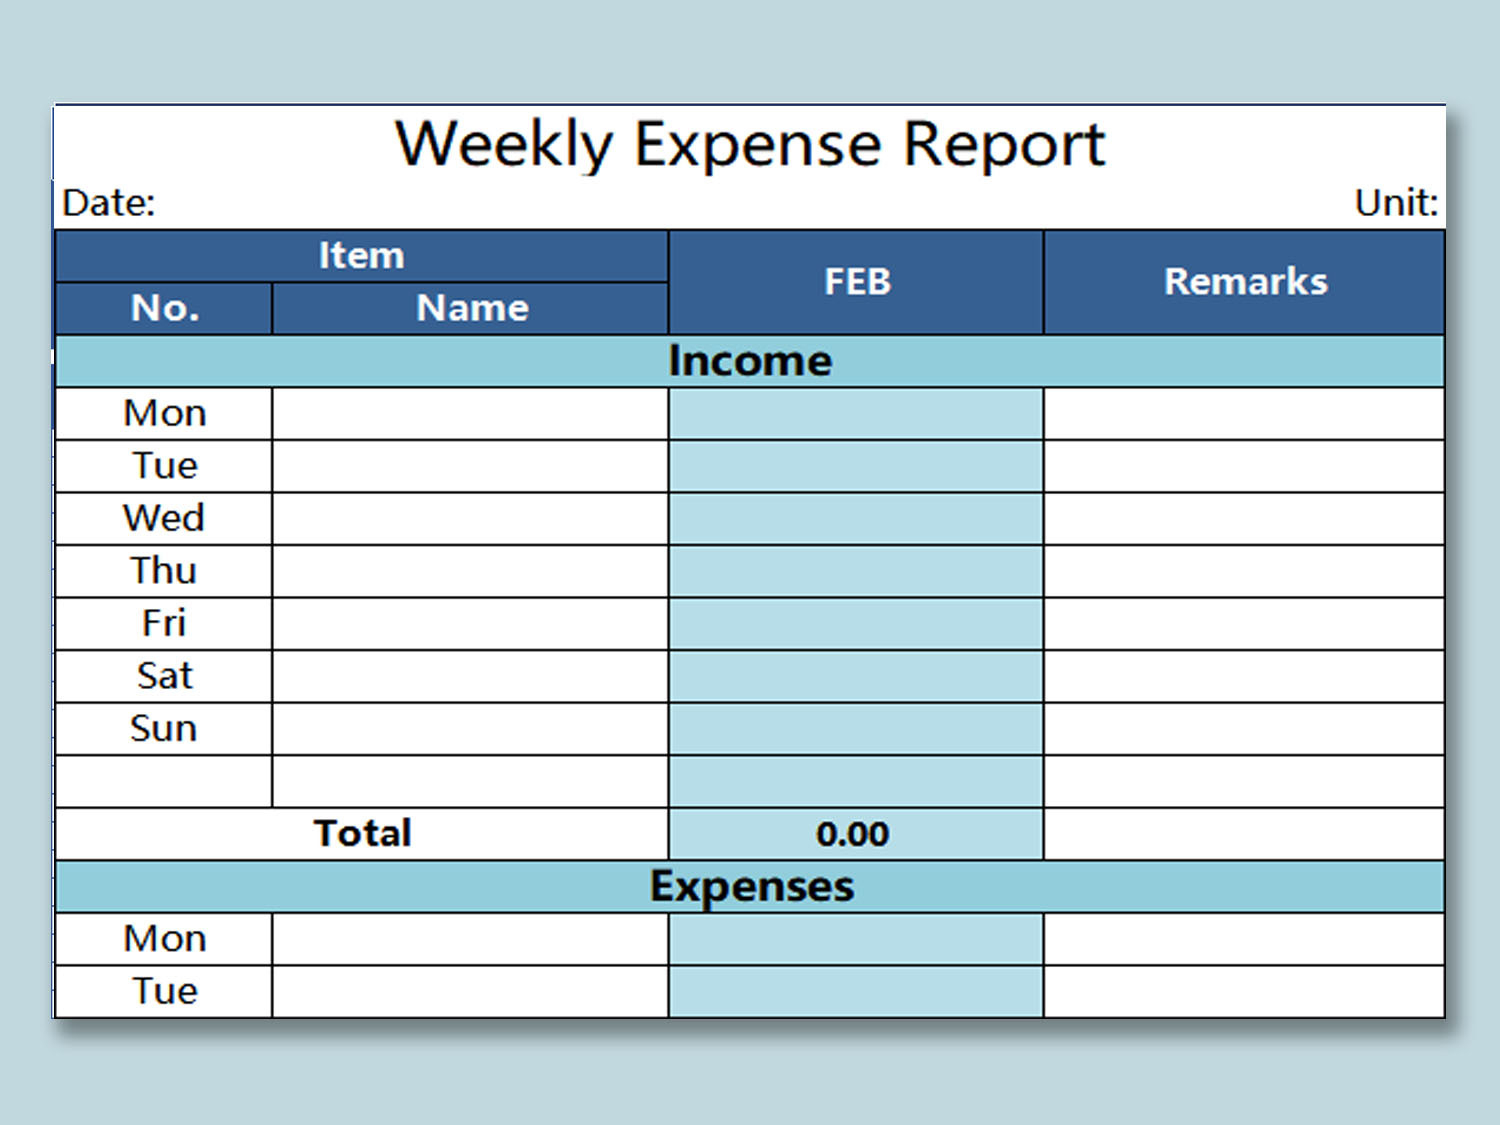 EXCEL of Weekly Expense Report